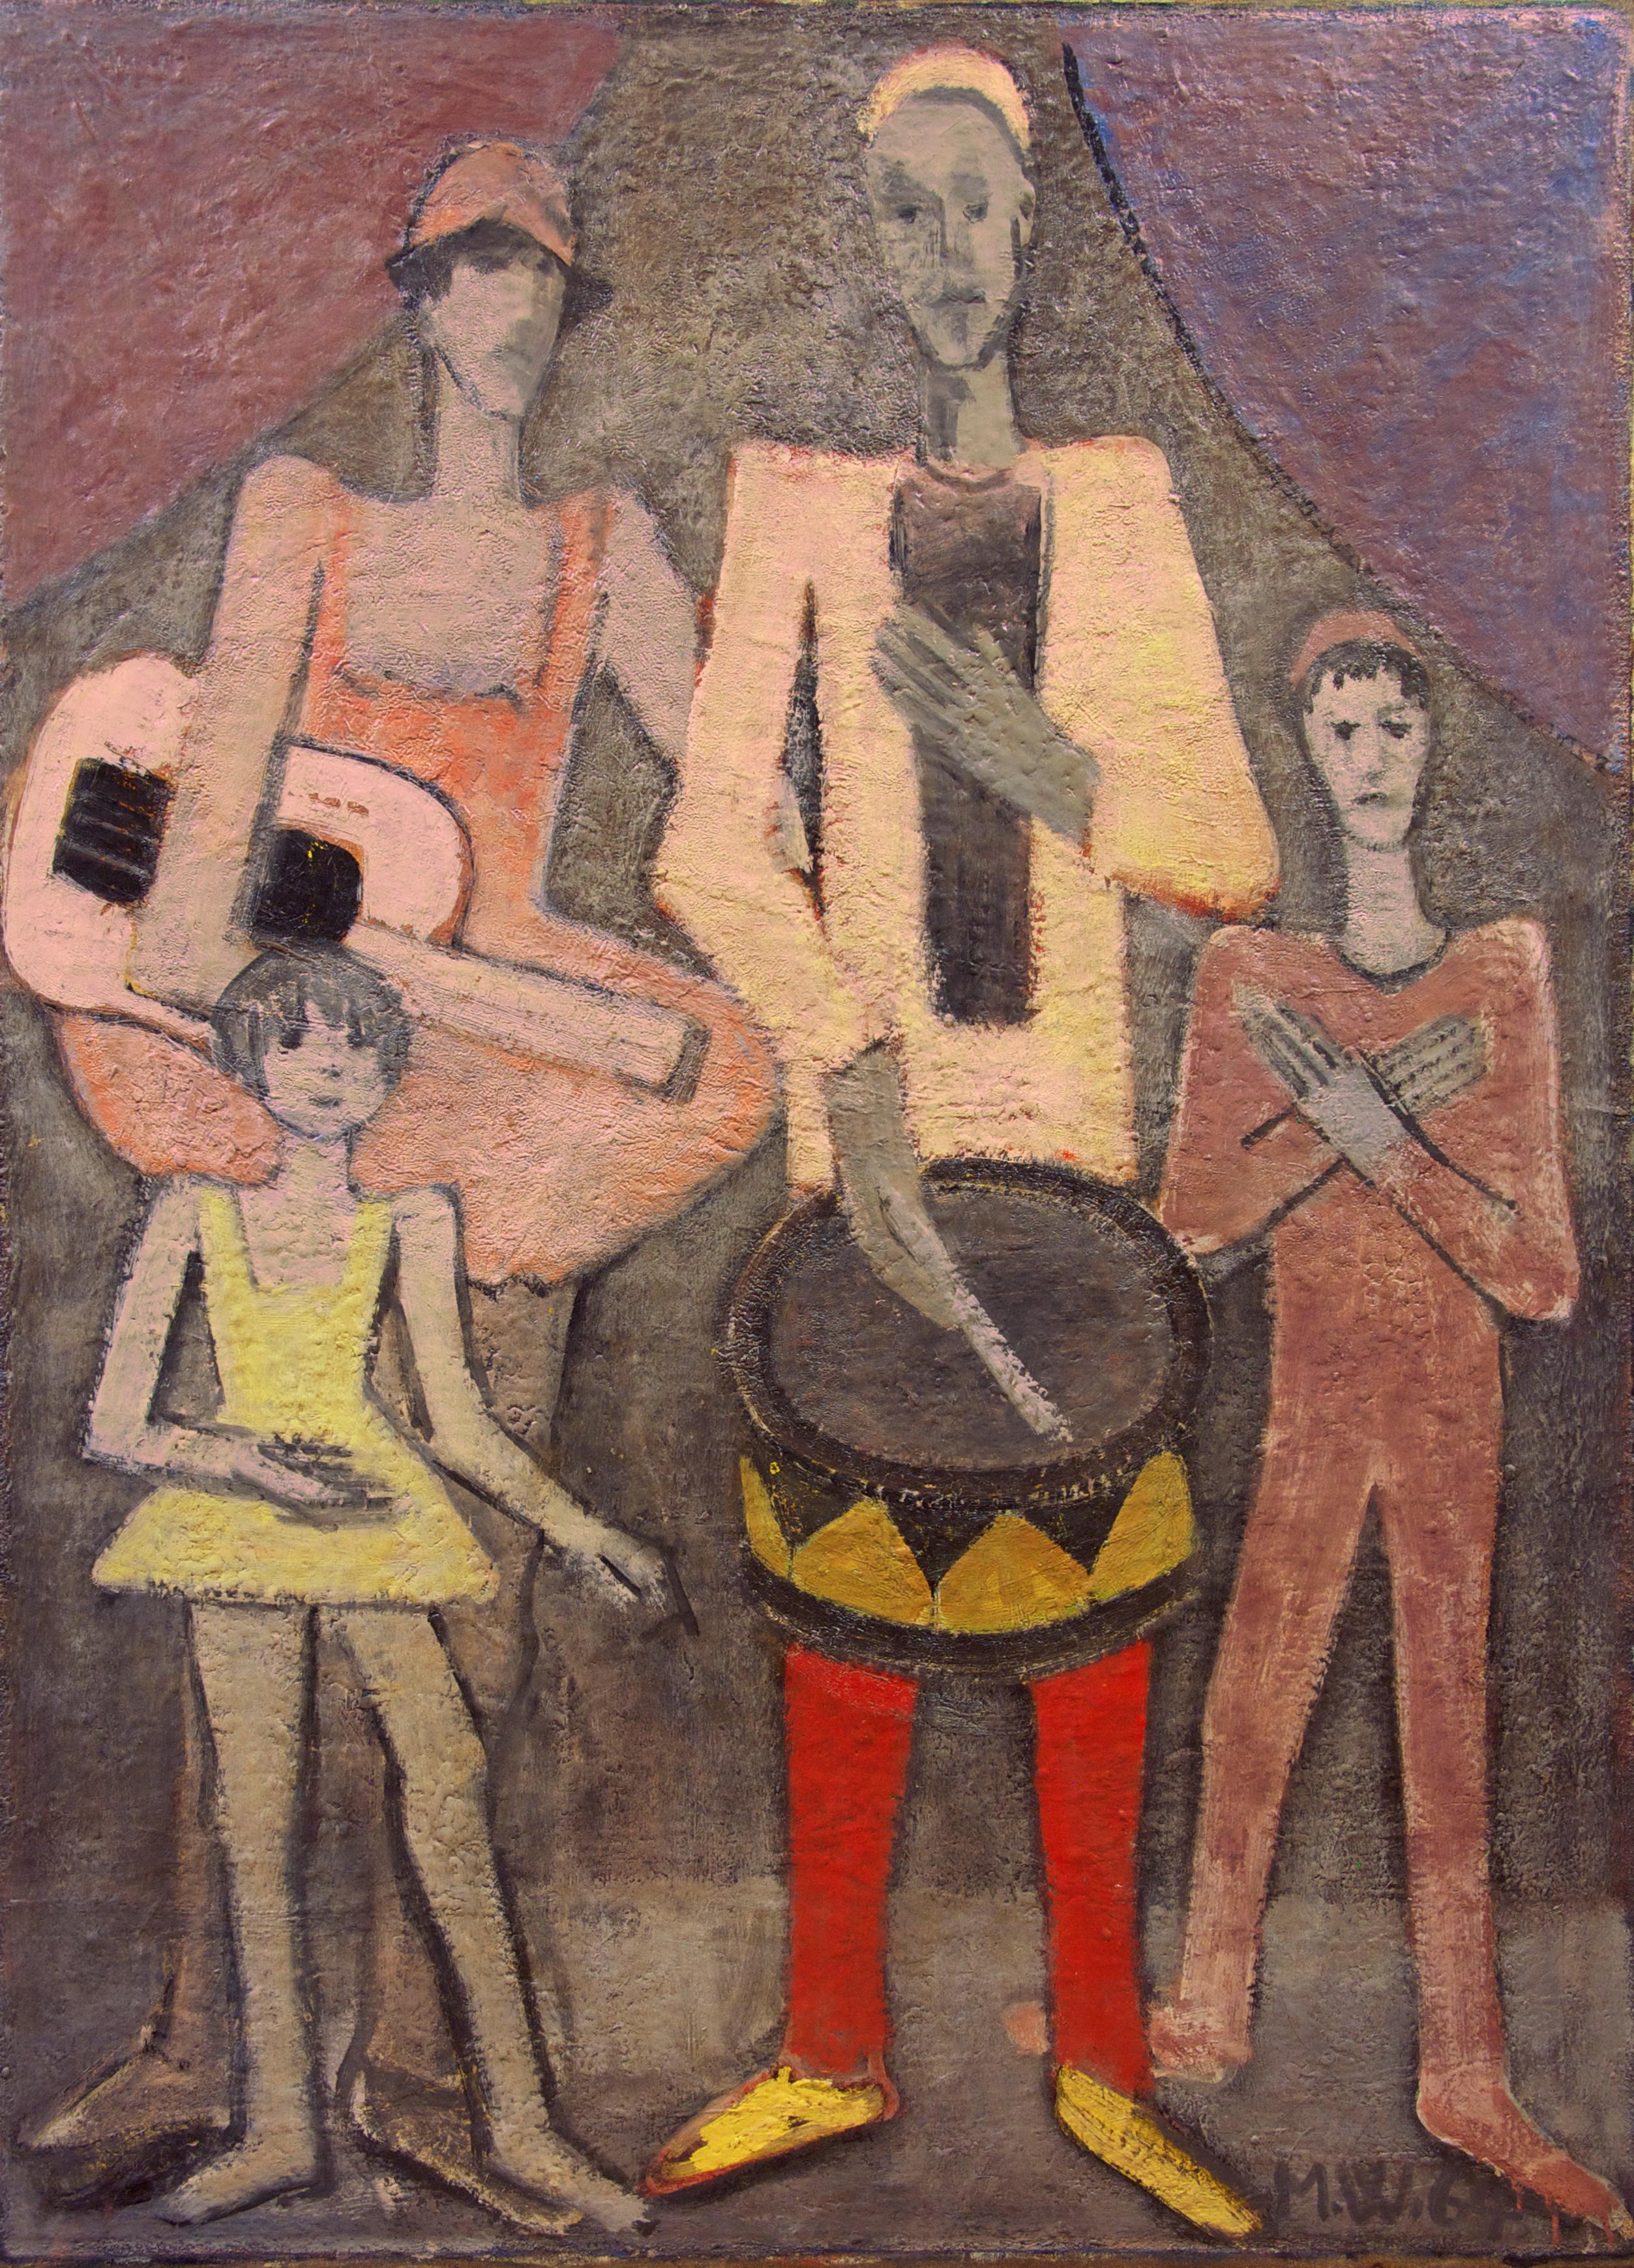 Michel Wagner Figurative Painting - Mid-Century modern cubist painting by Wagner, Titled "The Jester Family"